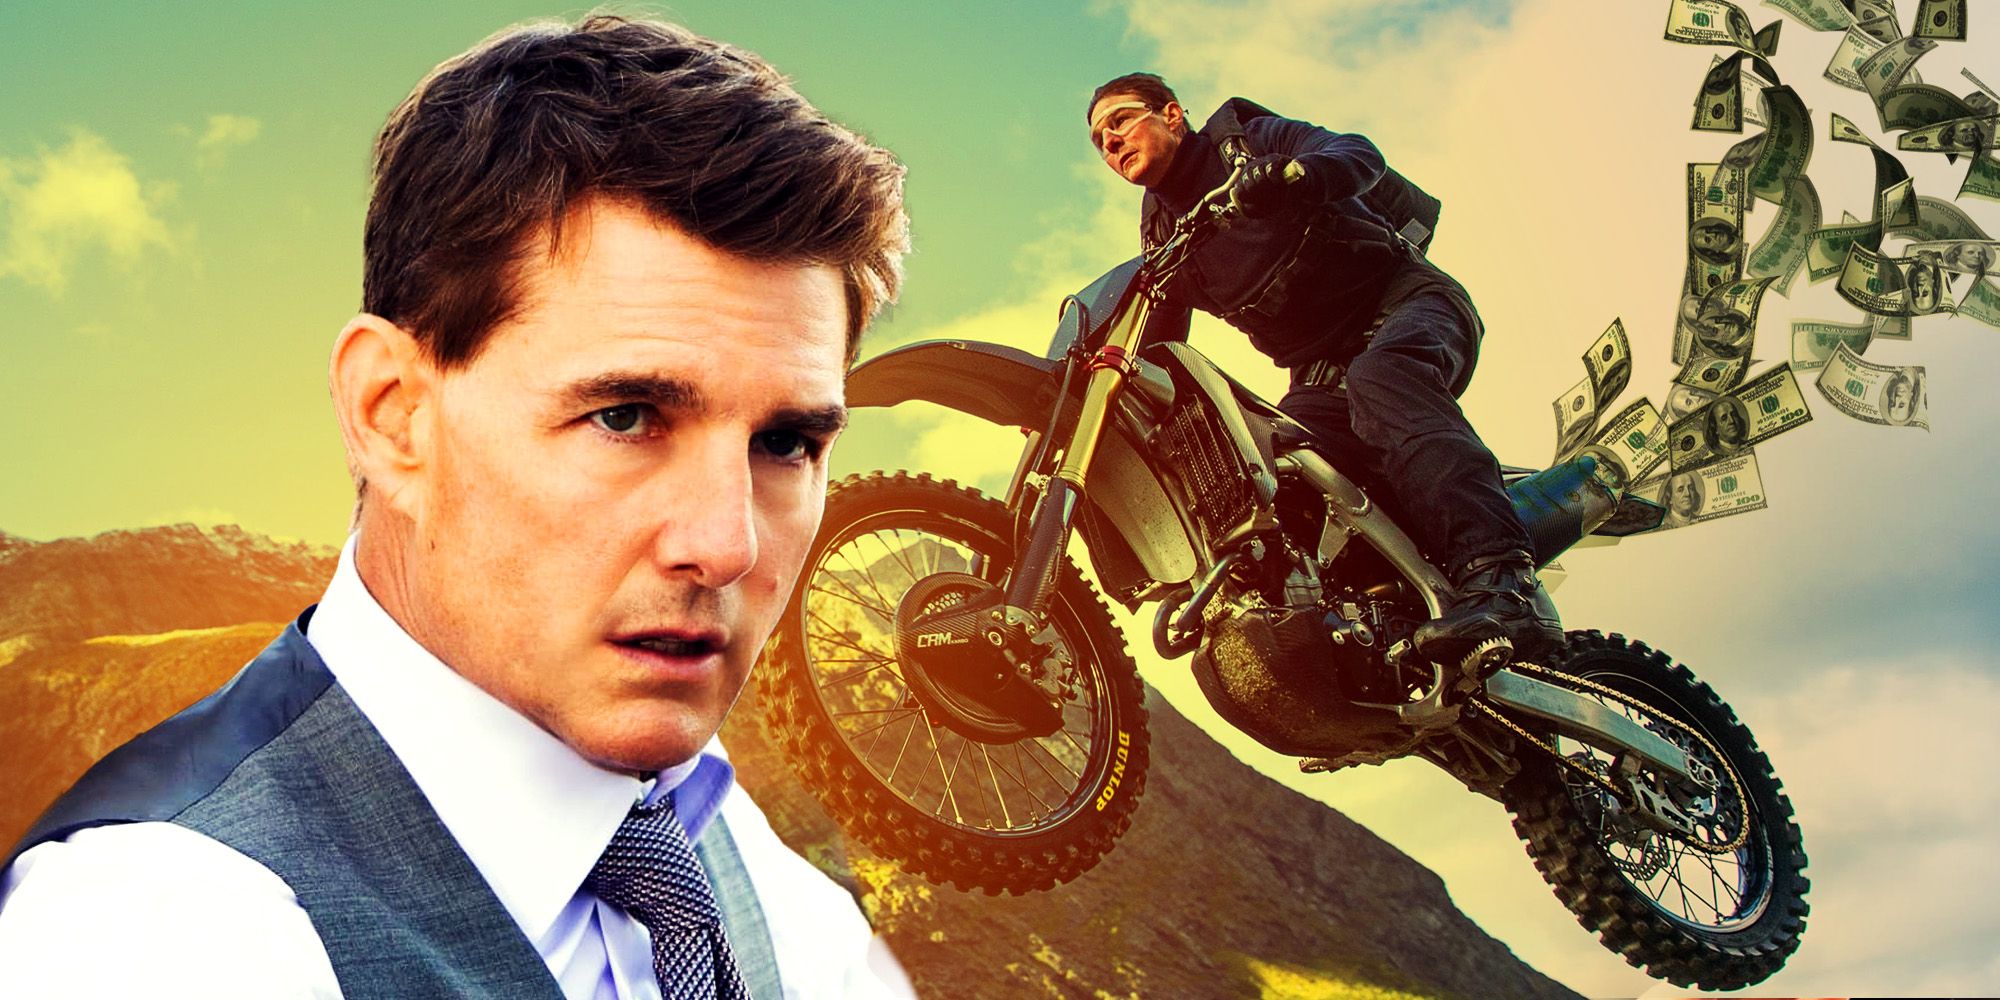 Dead Reckoning is Almost The Best and Worst Mission Impossible Box Office Opening